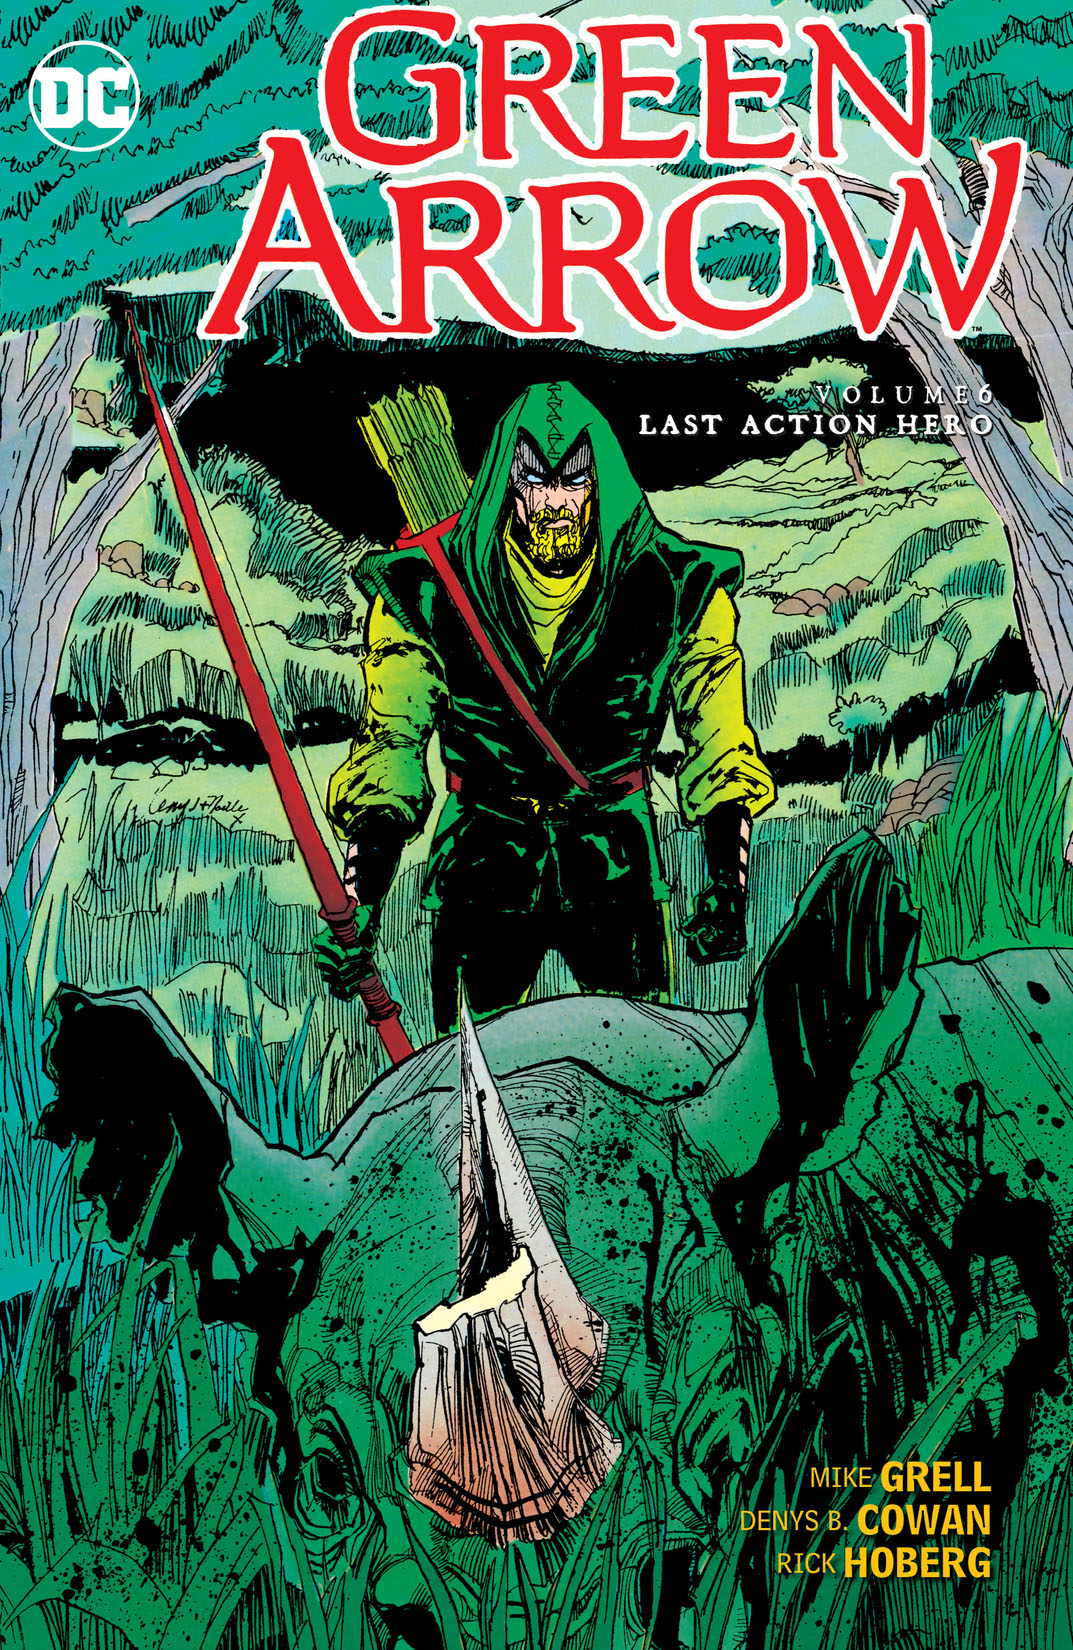 Green Arrow Vol. 6: Last Action Hero preview images